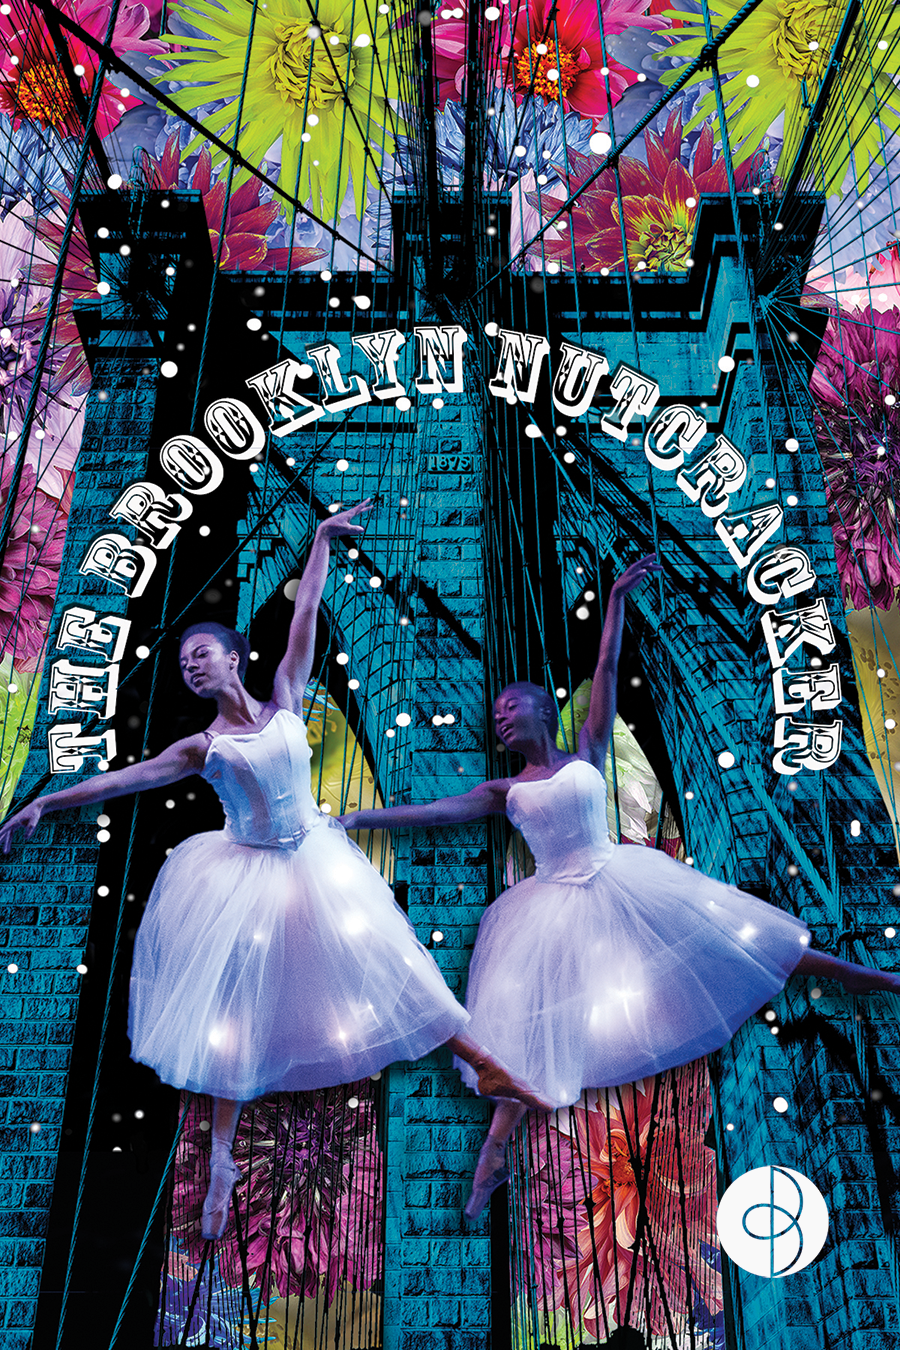 Two dancers in white tutus pose against a colorful backdrop. The Brooklyn Nutcracker is printed in silver.